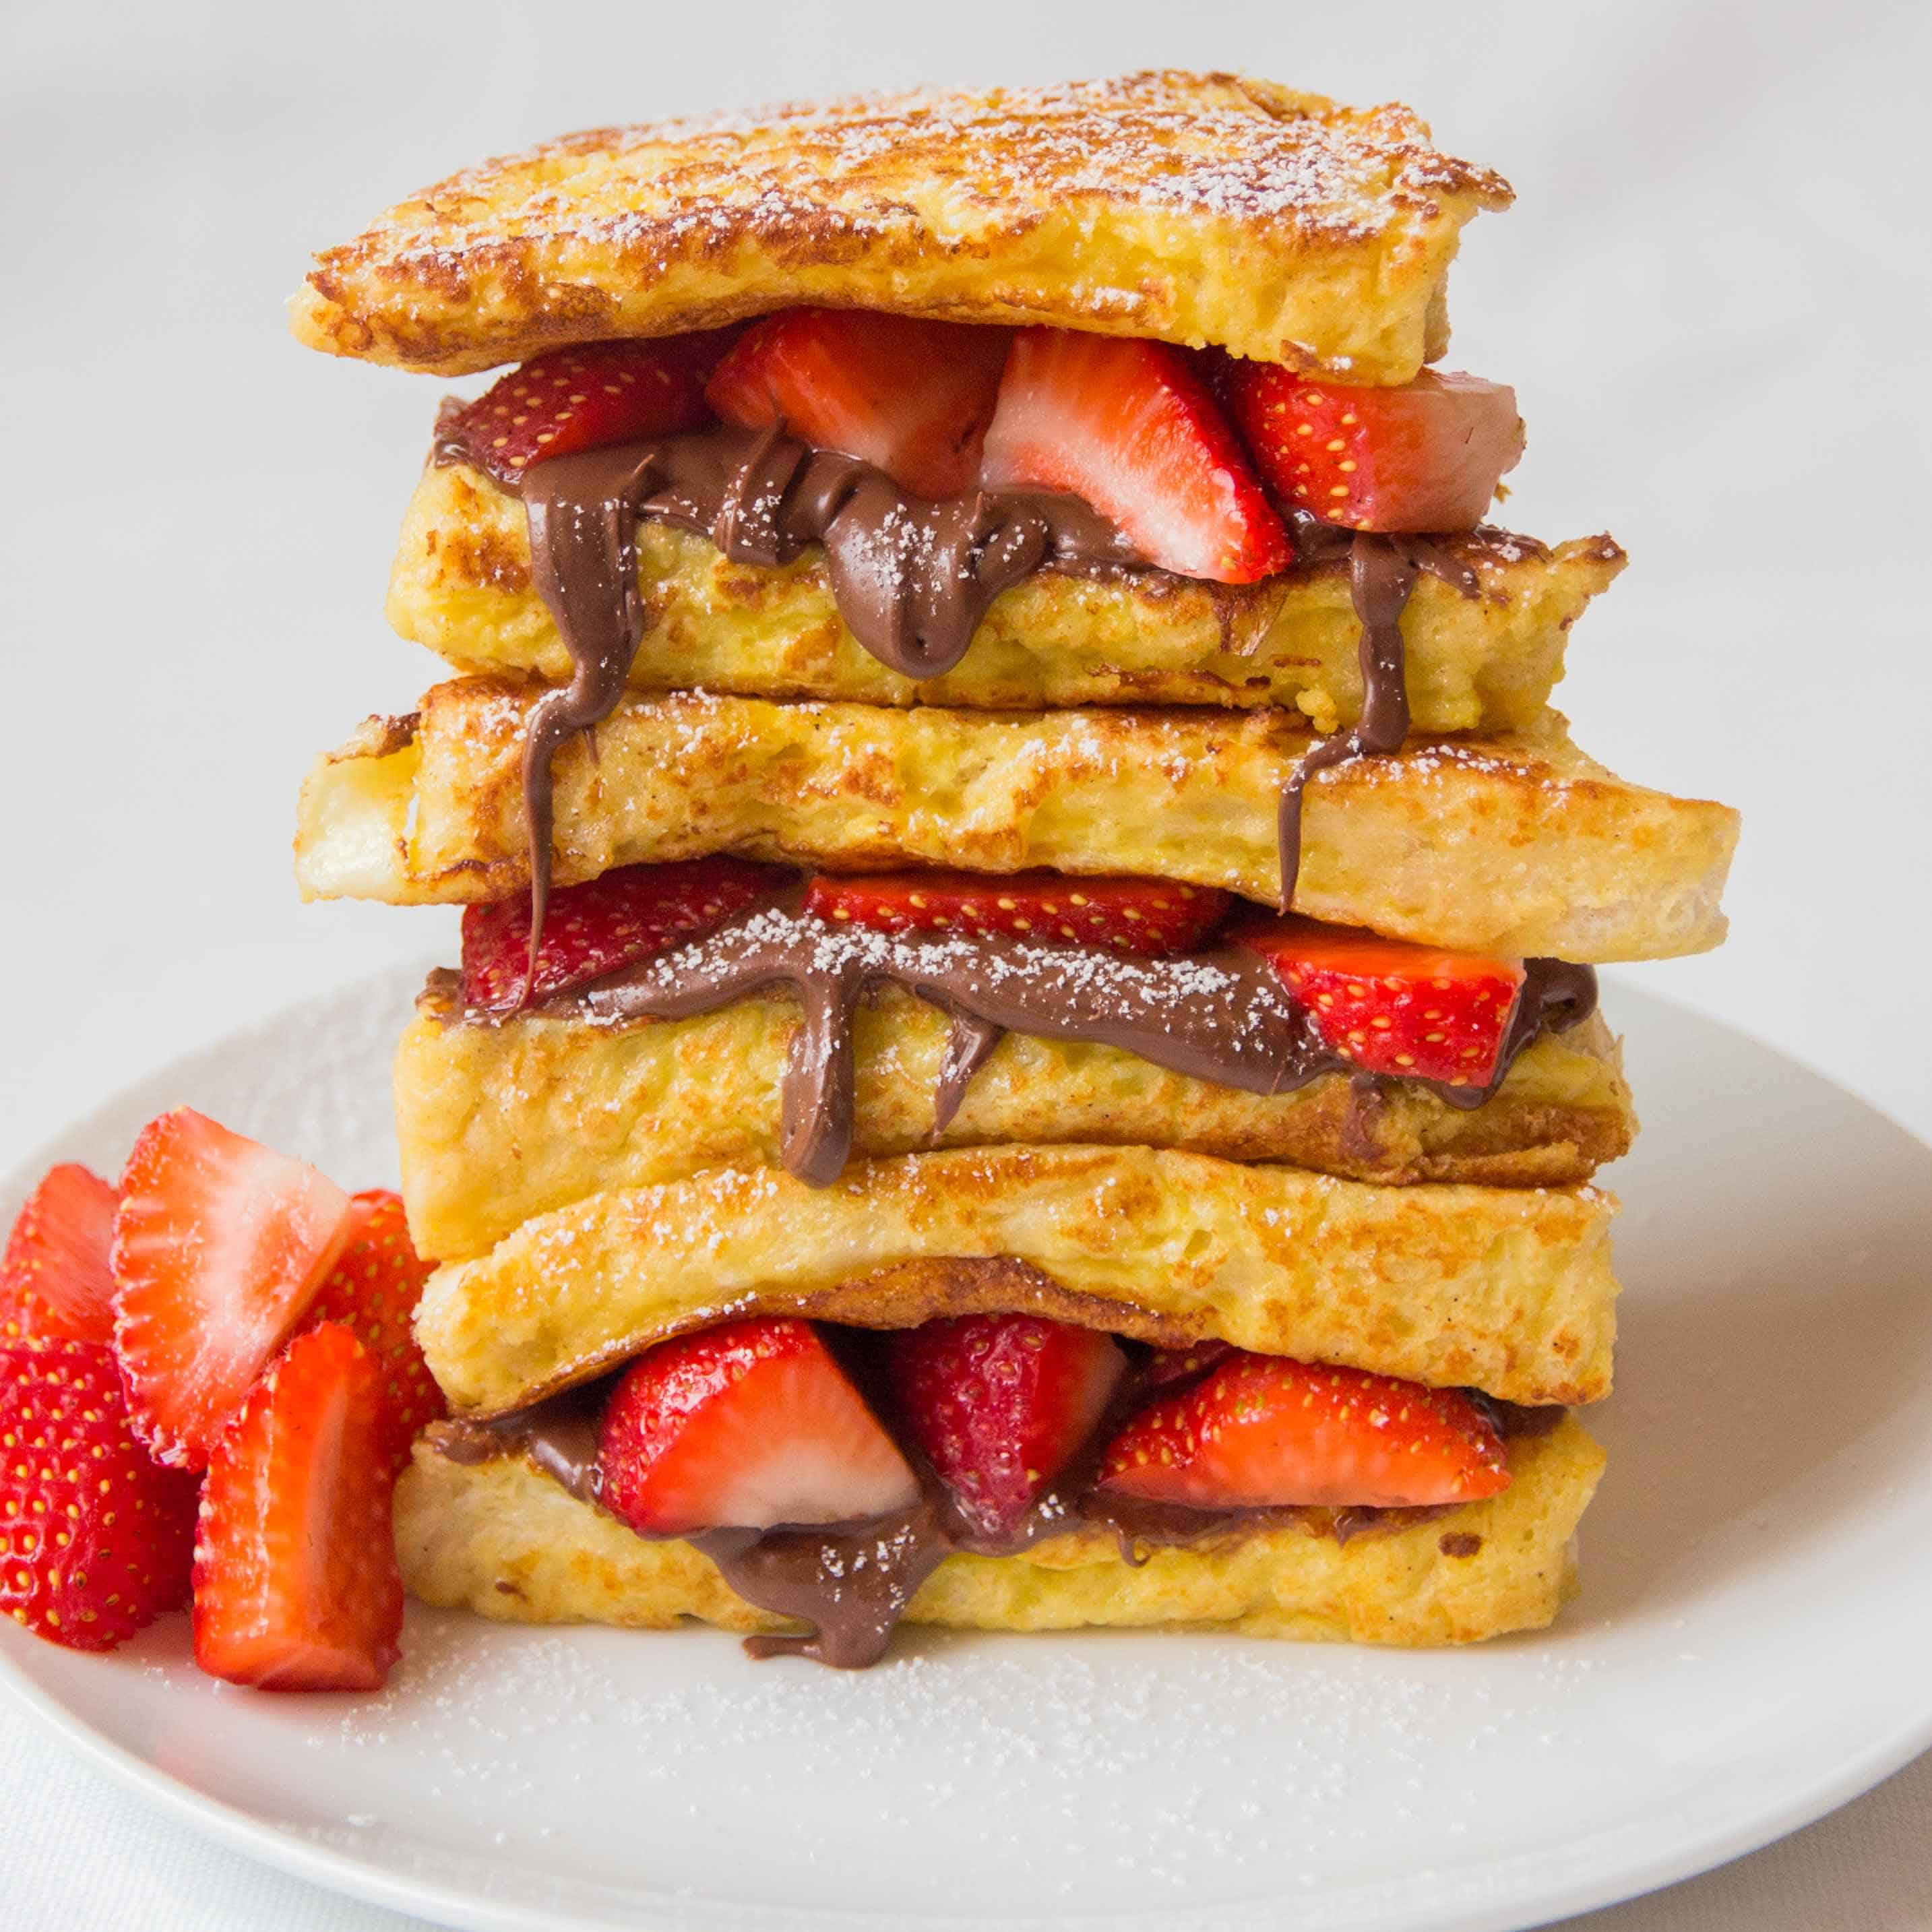 Strawberry Nutella Toastie - day 5 of my five day 'Sweet Toasties' series to brighten up your holiday breakfast.